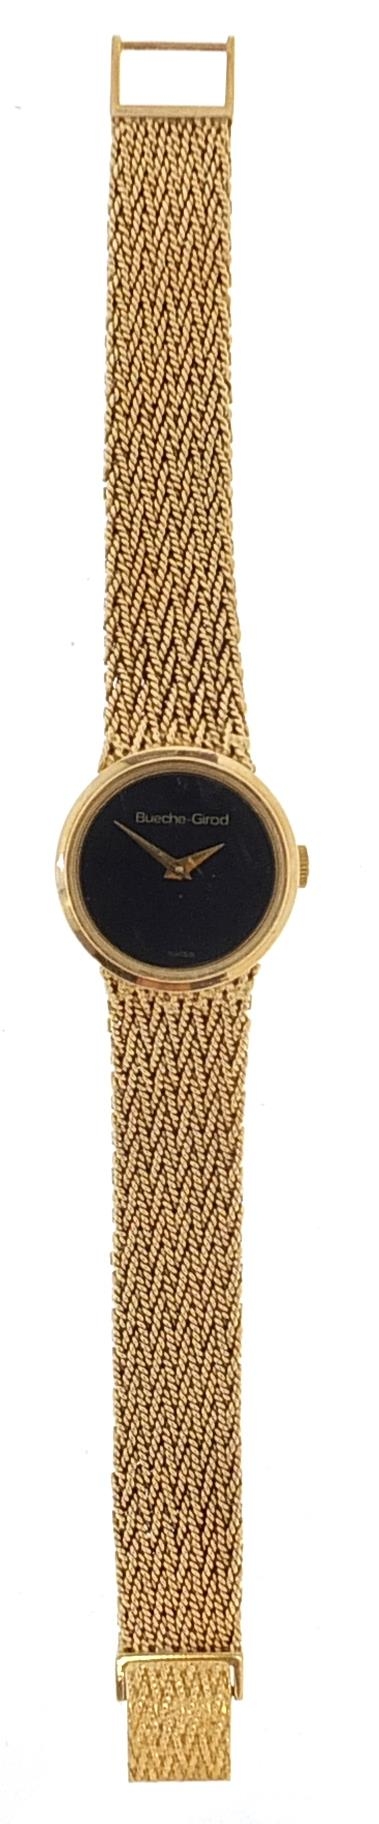 9ct gold Bueche Girod ladies wristwatch with 9ct gold strap, 49.7g - Image 2 of 5